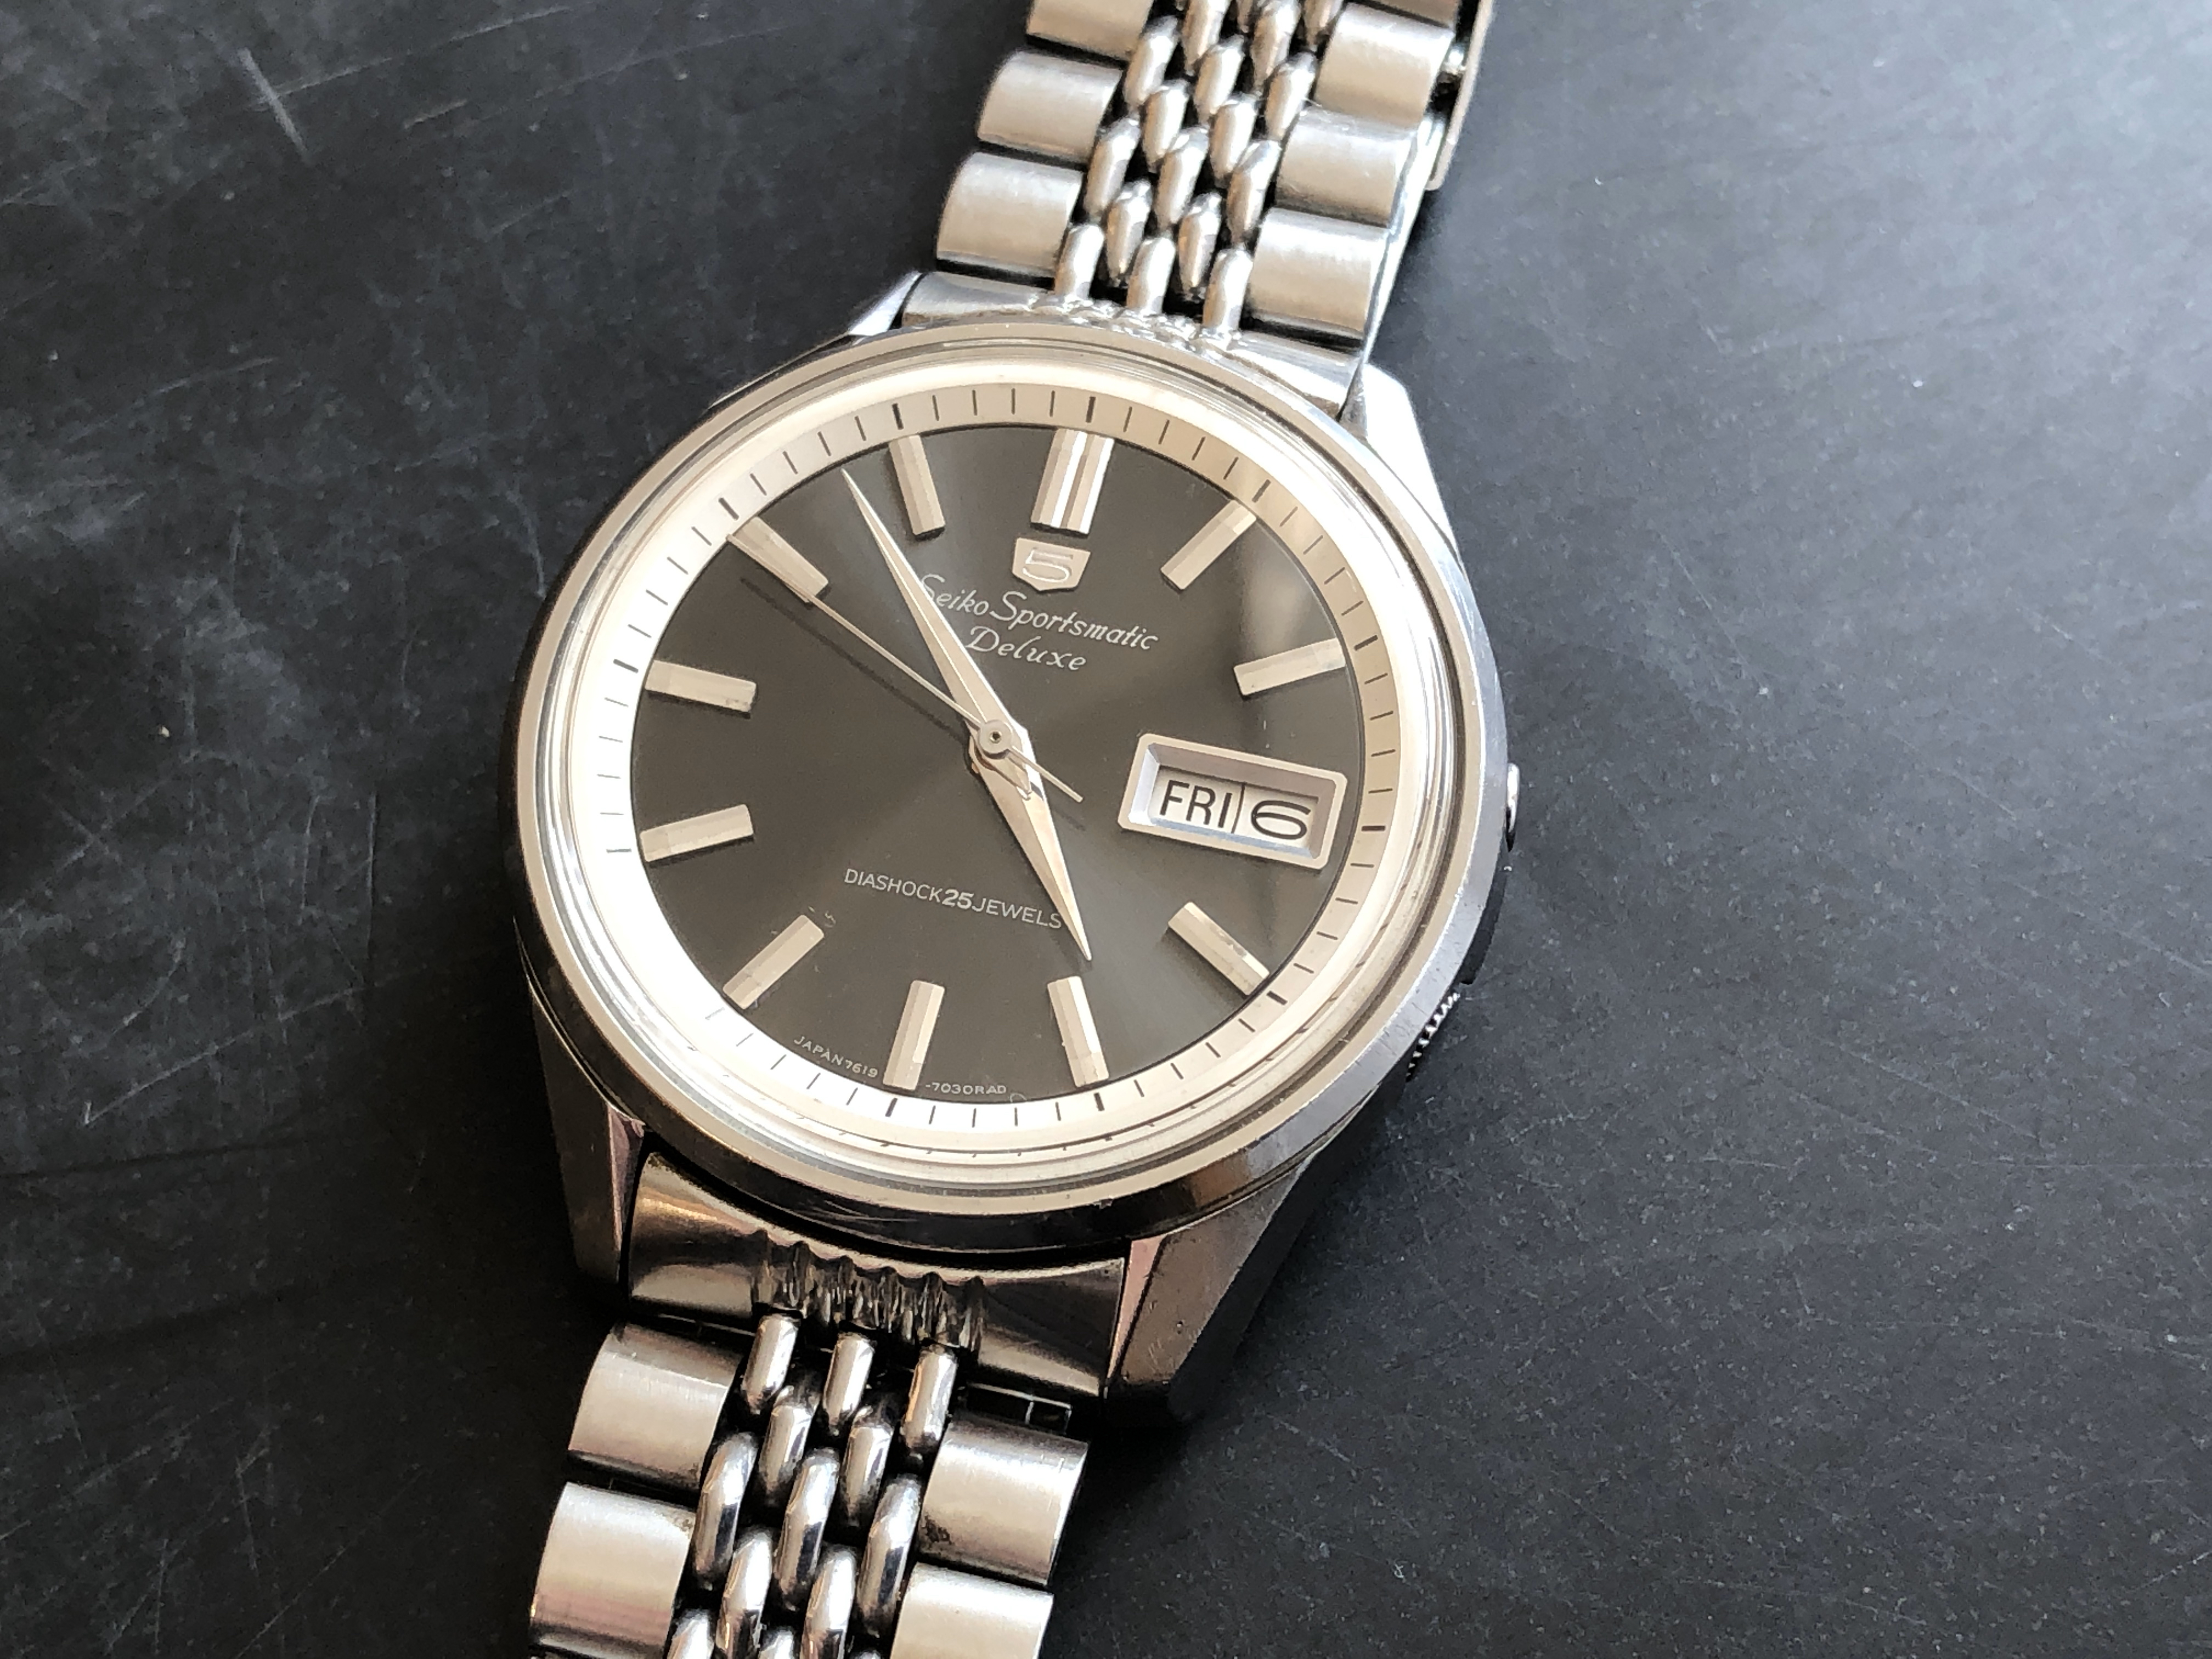 Seiko Sportsmatic Deluxe 7619-7010 (Sold)